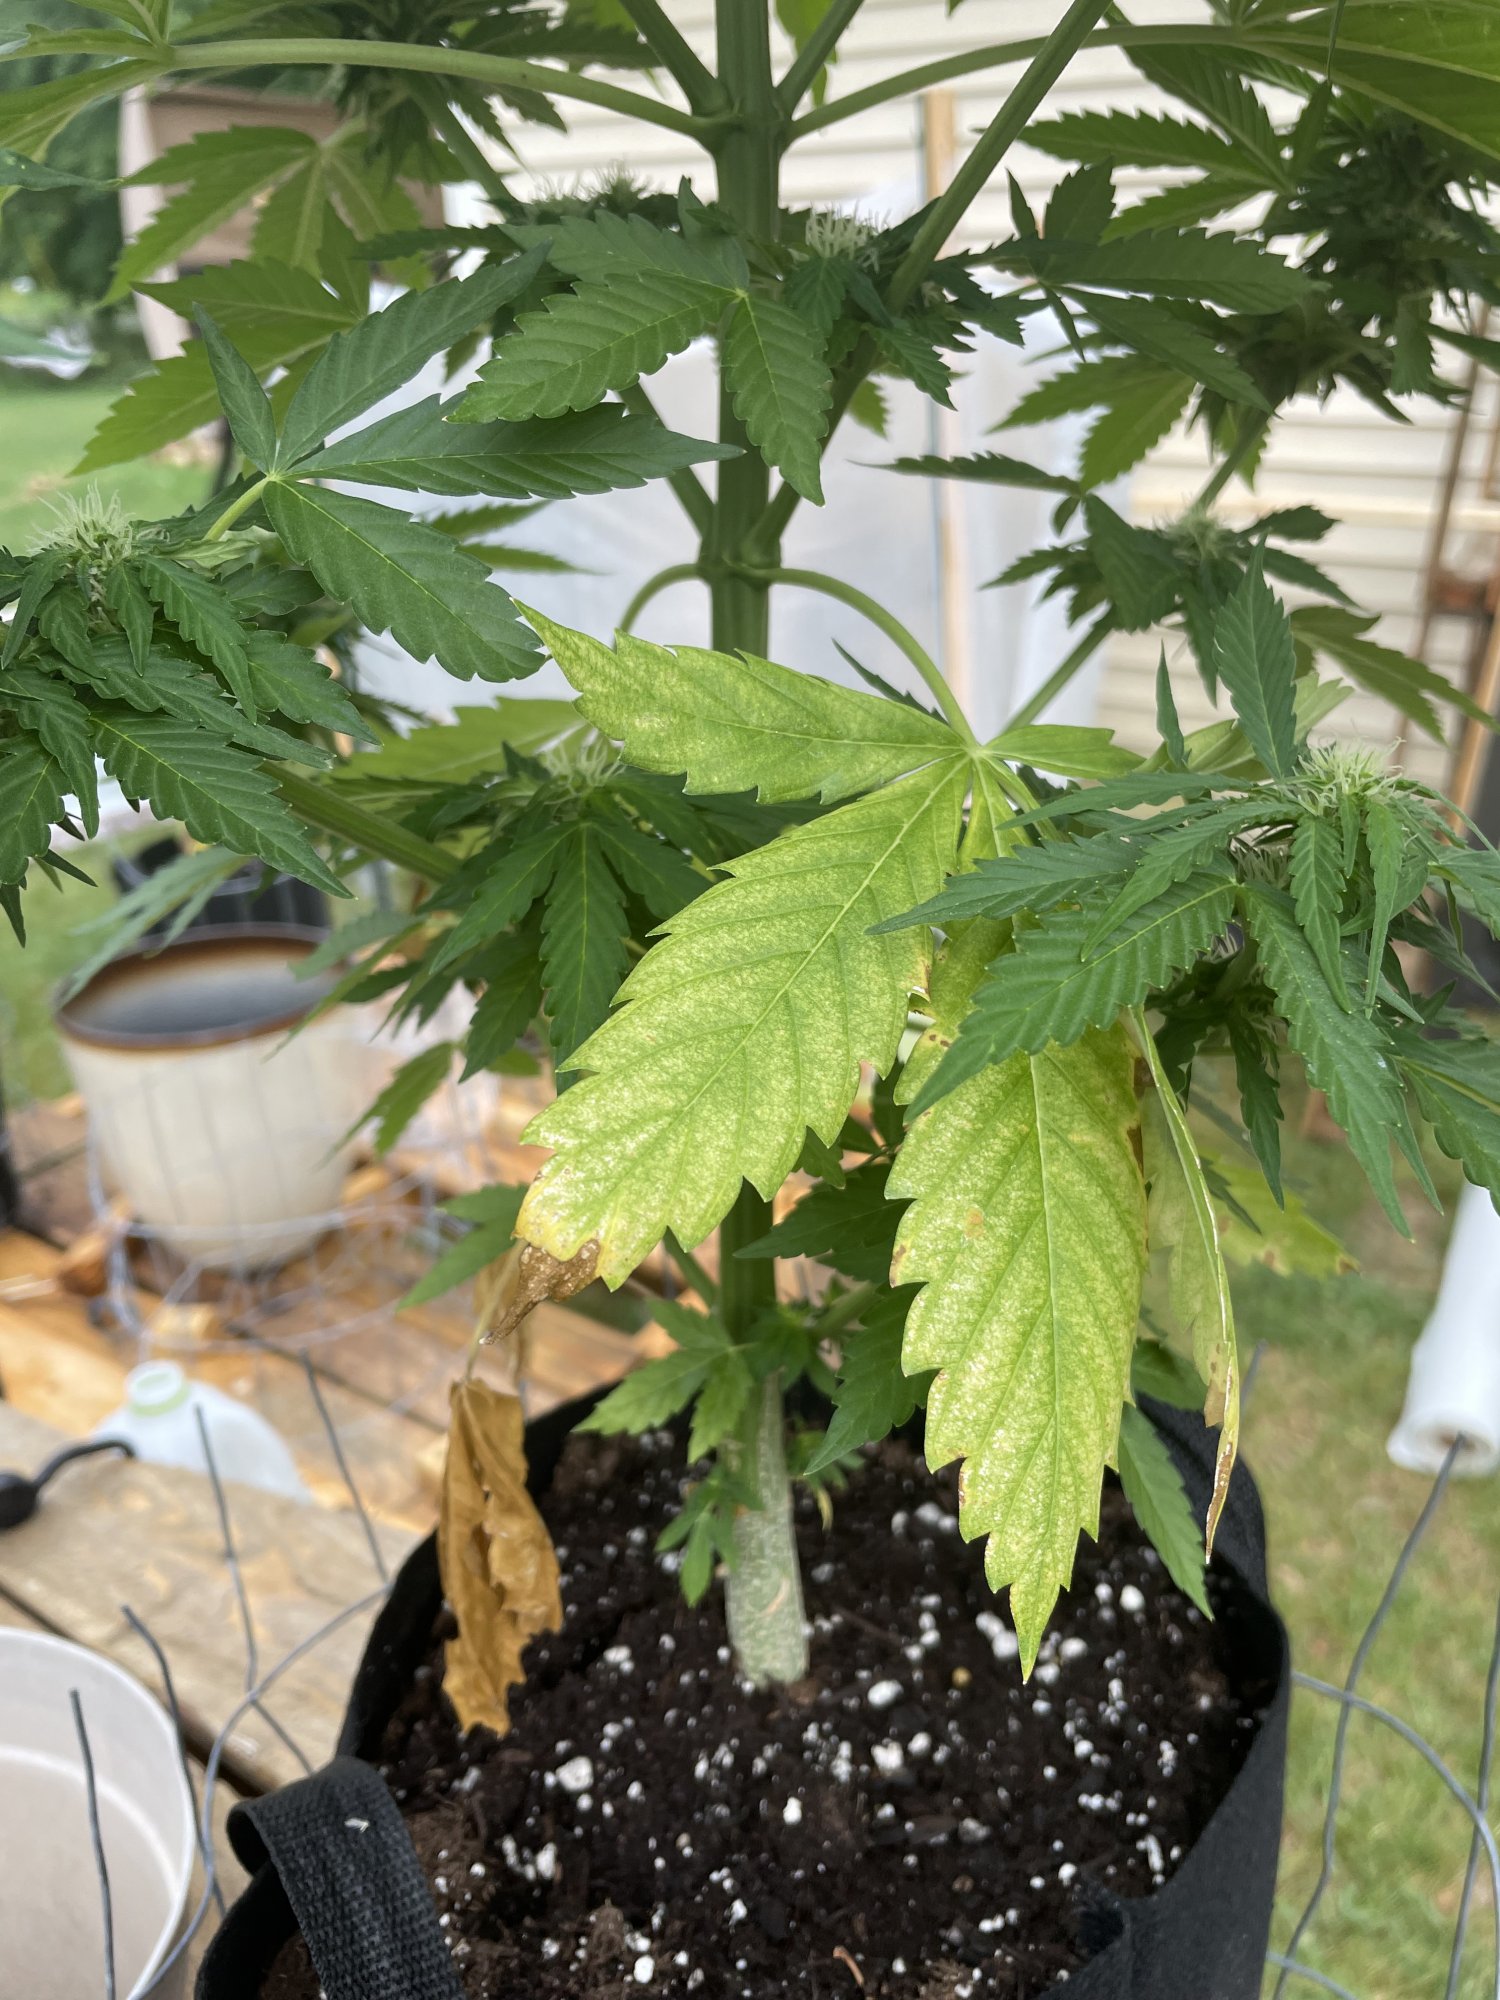 Lower leaves fading during flowering